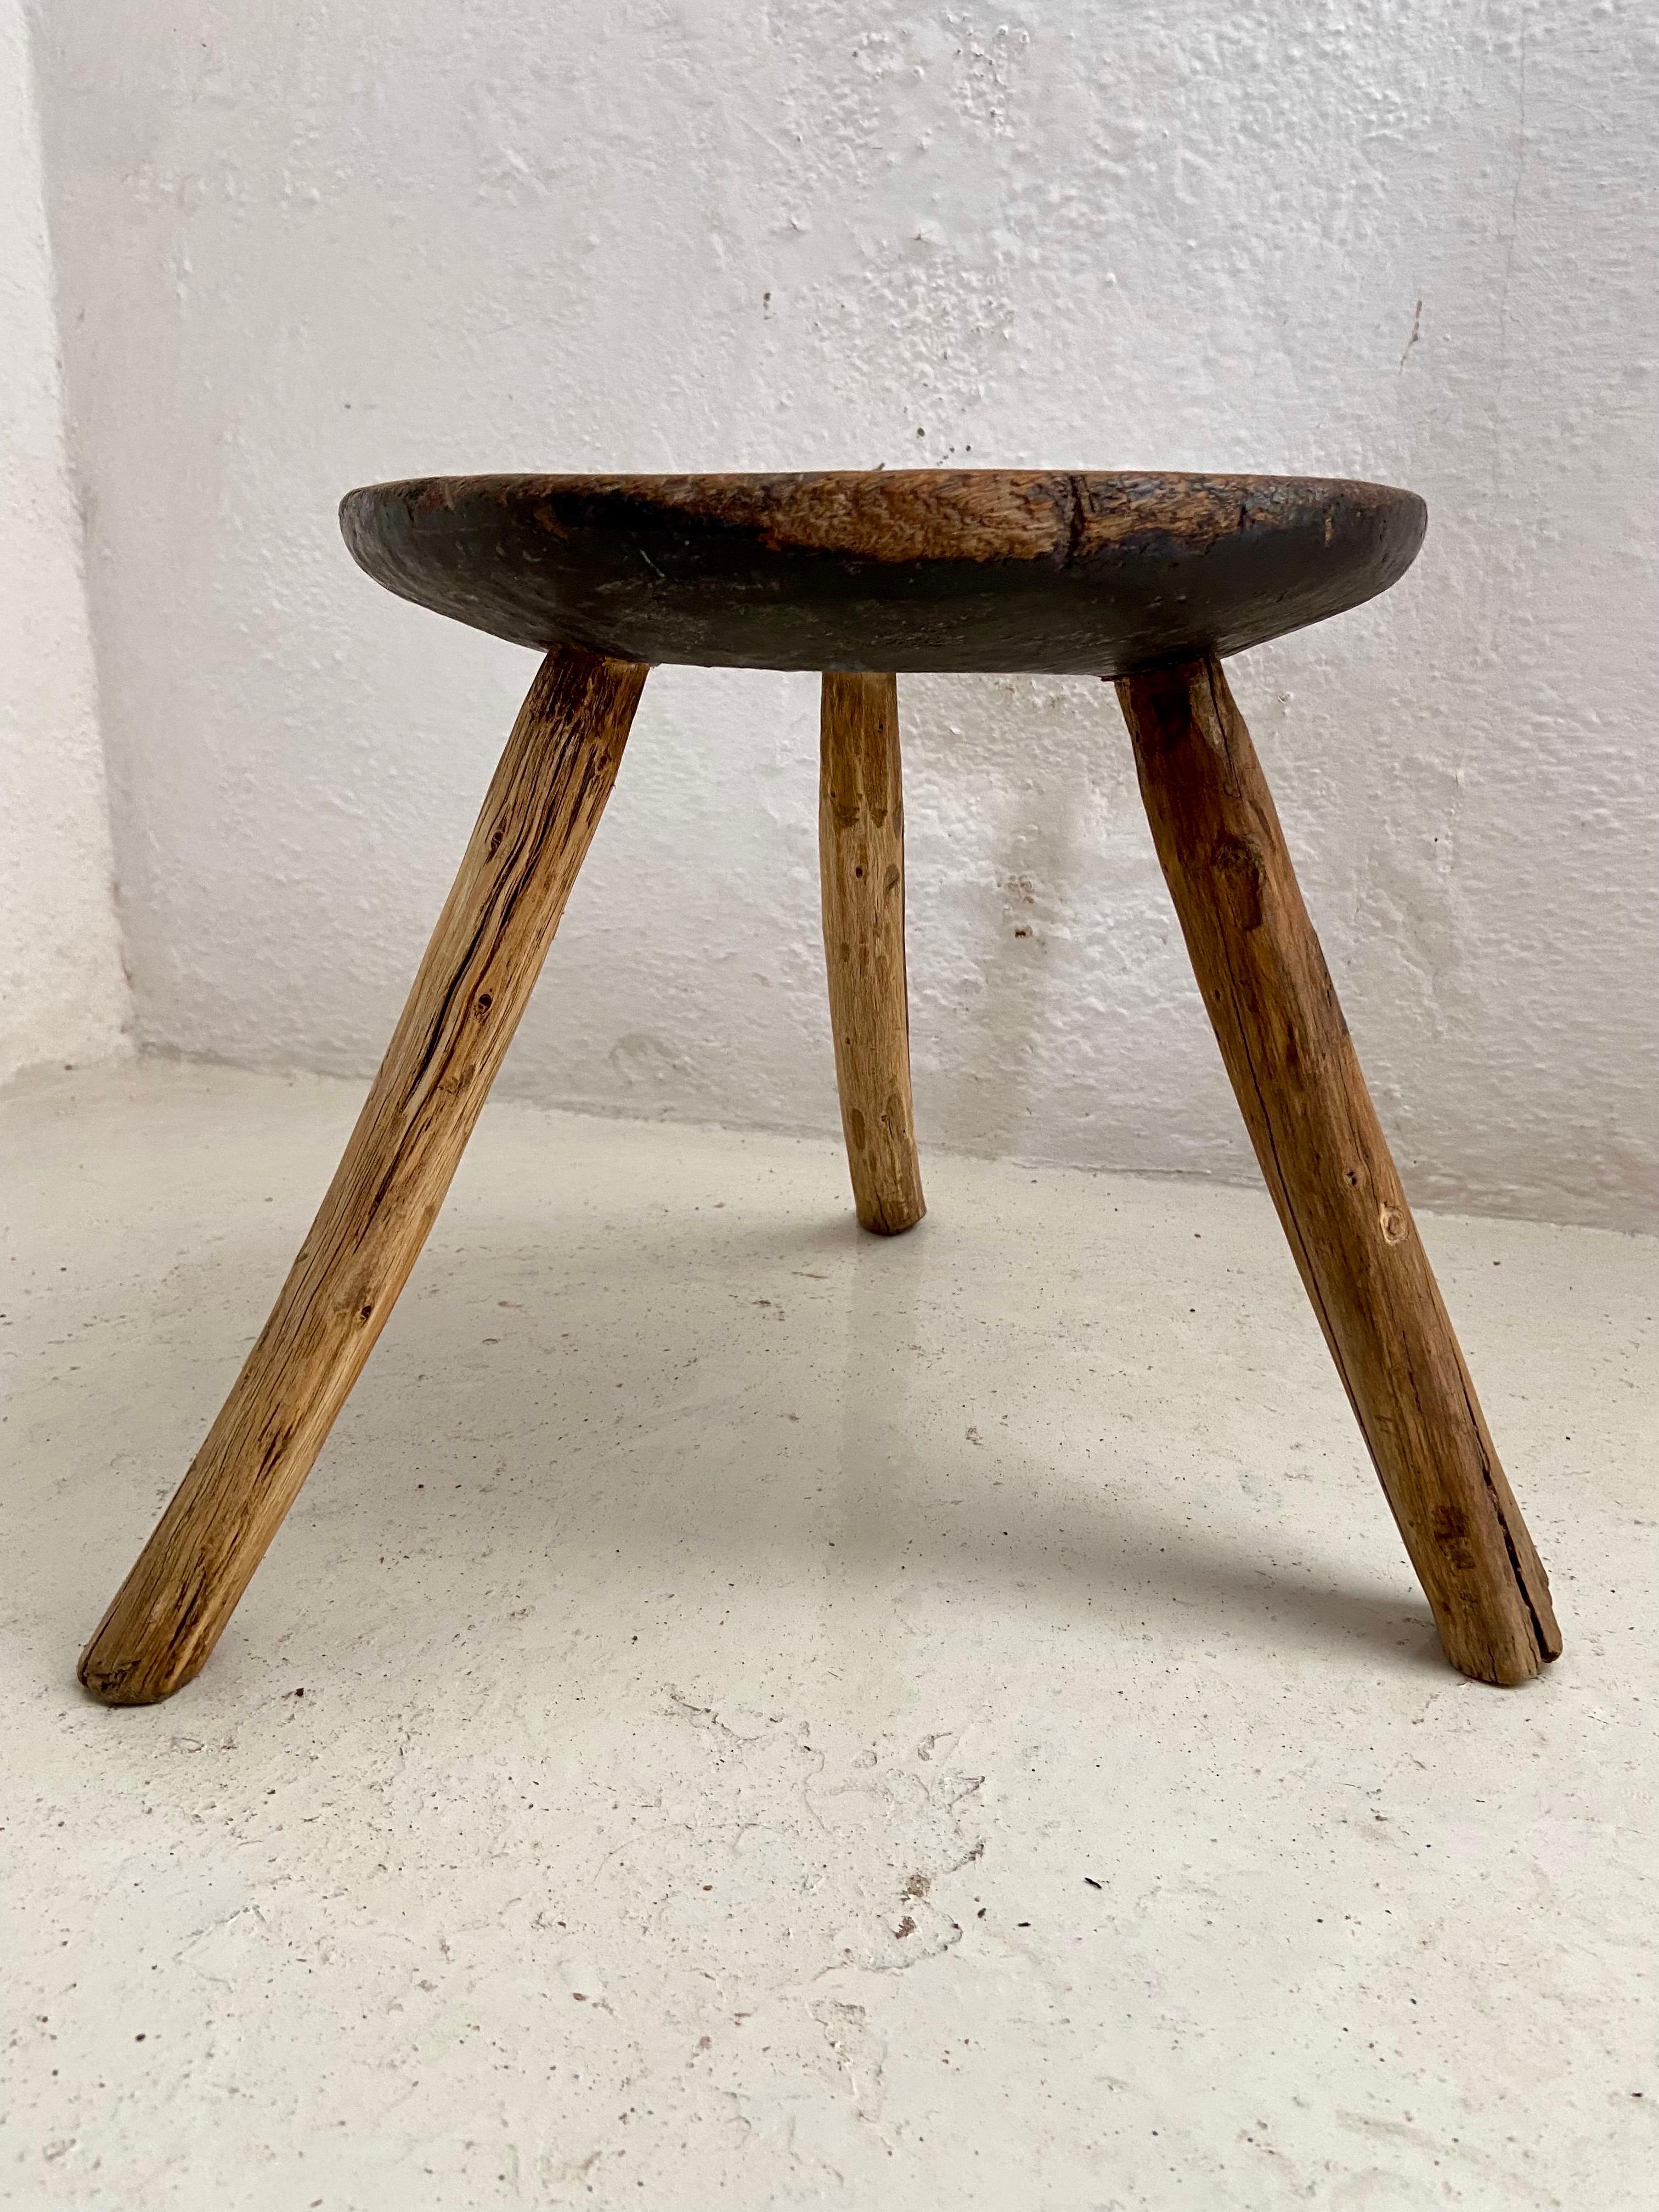 Mexican Hardwood Stool from Mexico, circa 1930´s